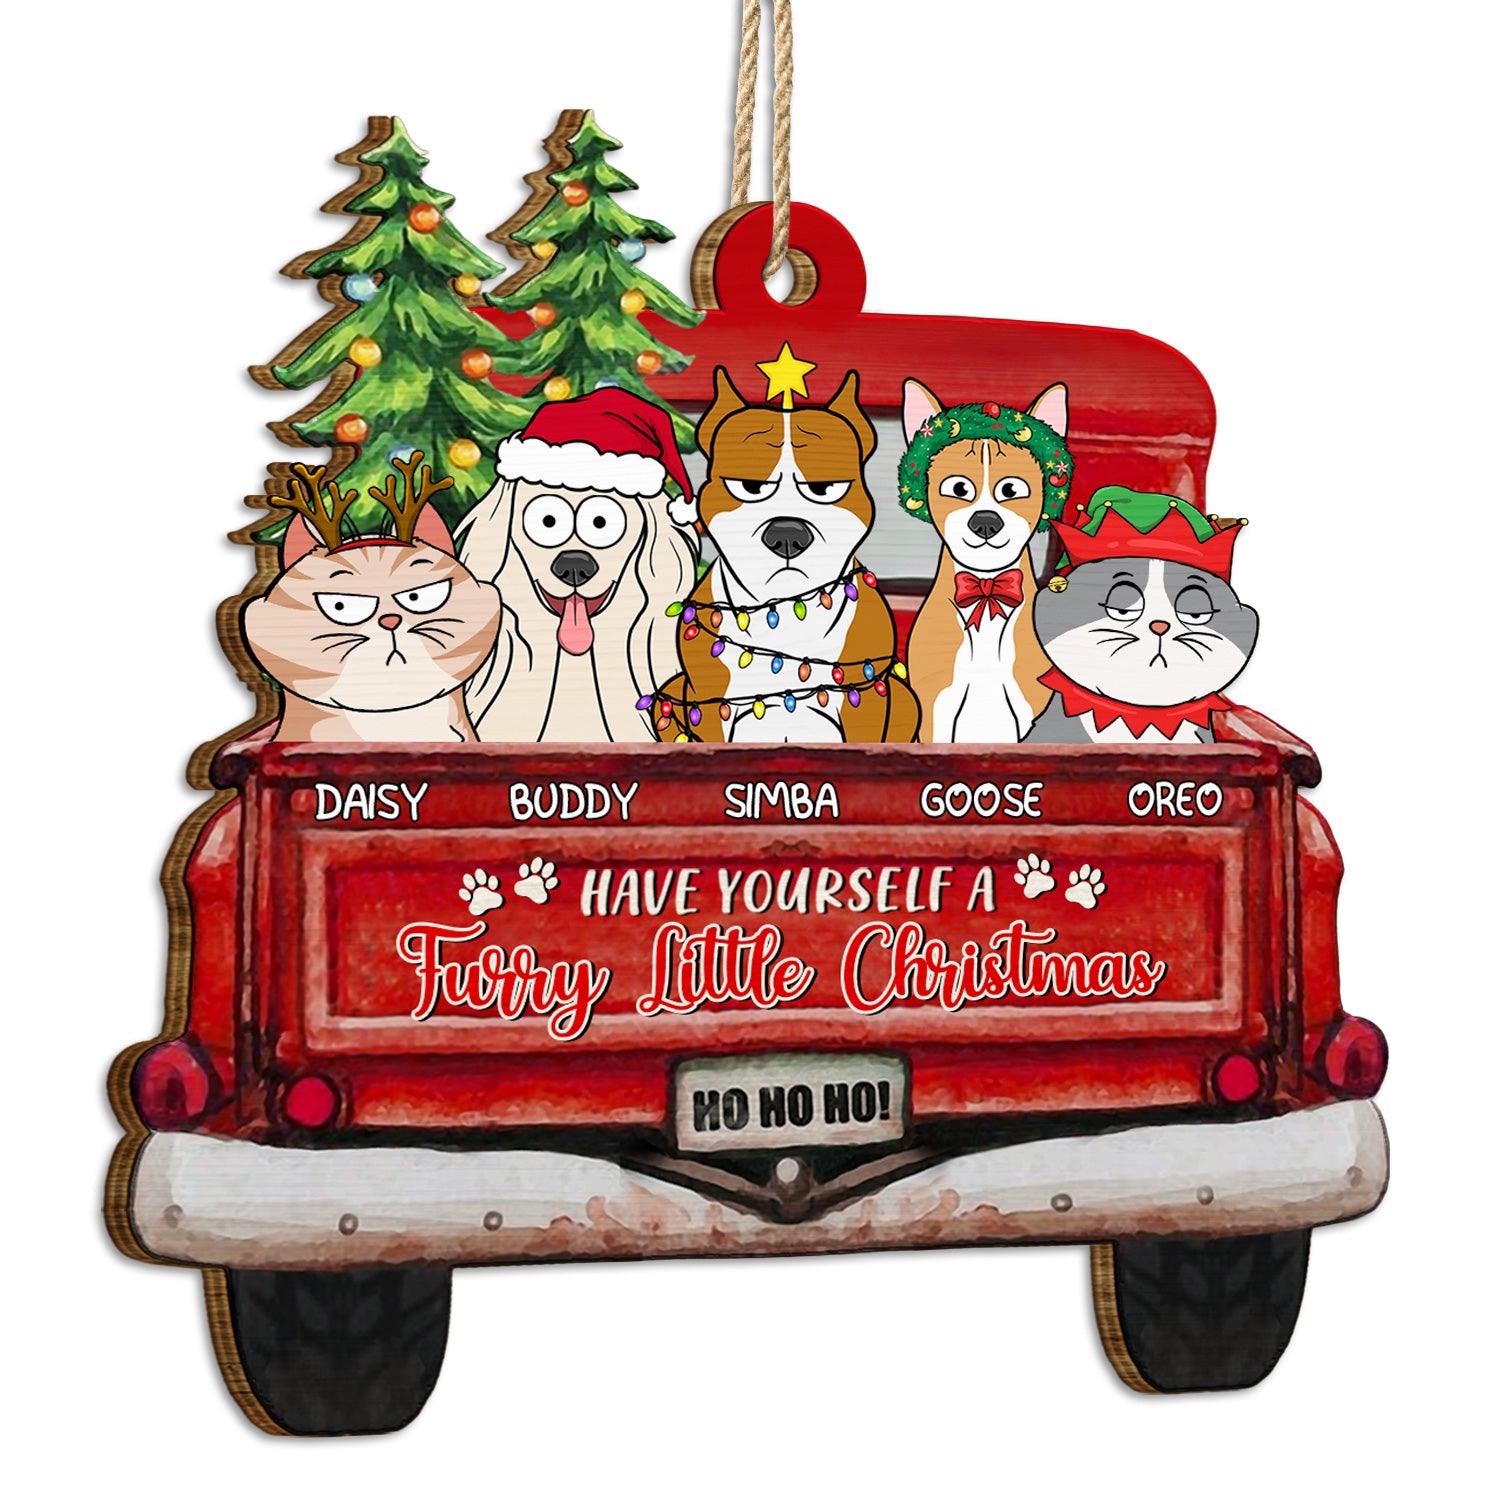 Have Yourself A Furry Little Christmas - Christmas Gift For Dog, Cat, Pet Lovers - Personalized Wooden Cutout Ornament